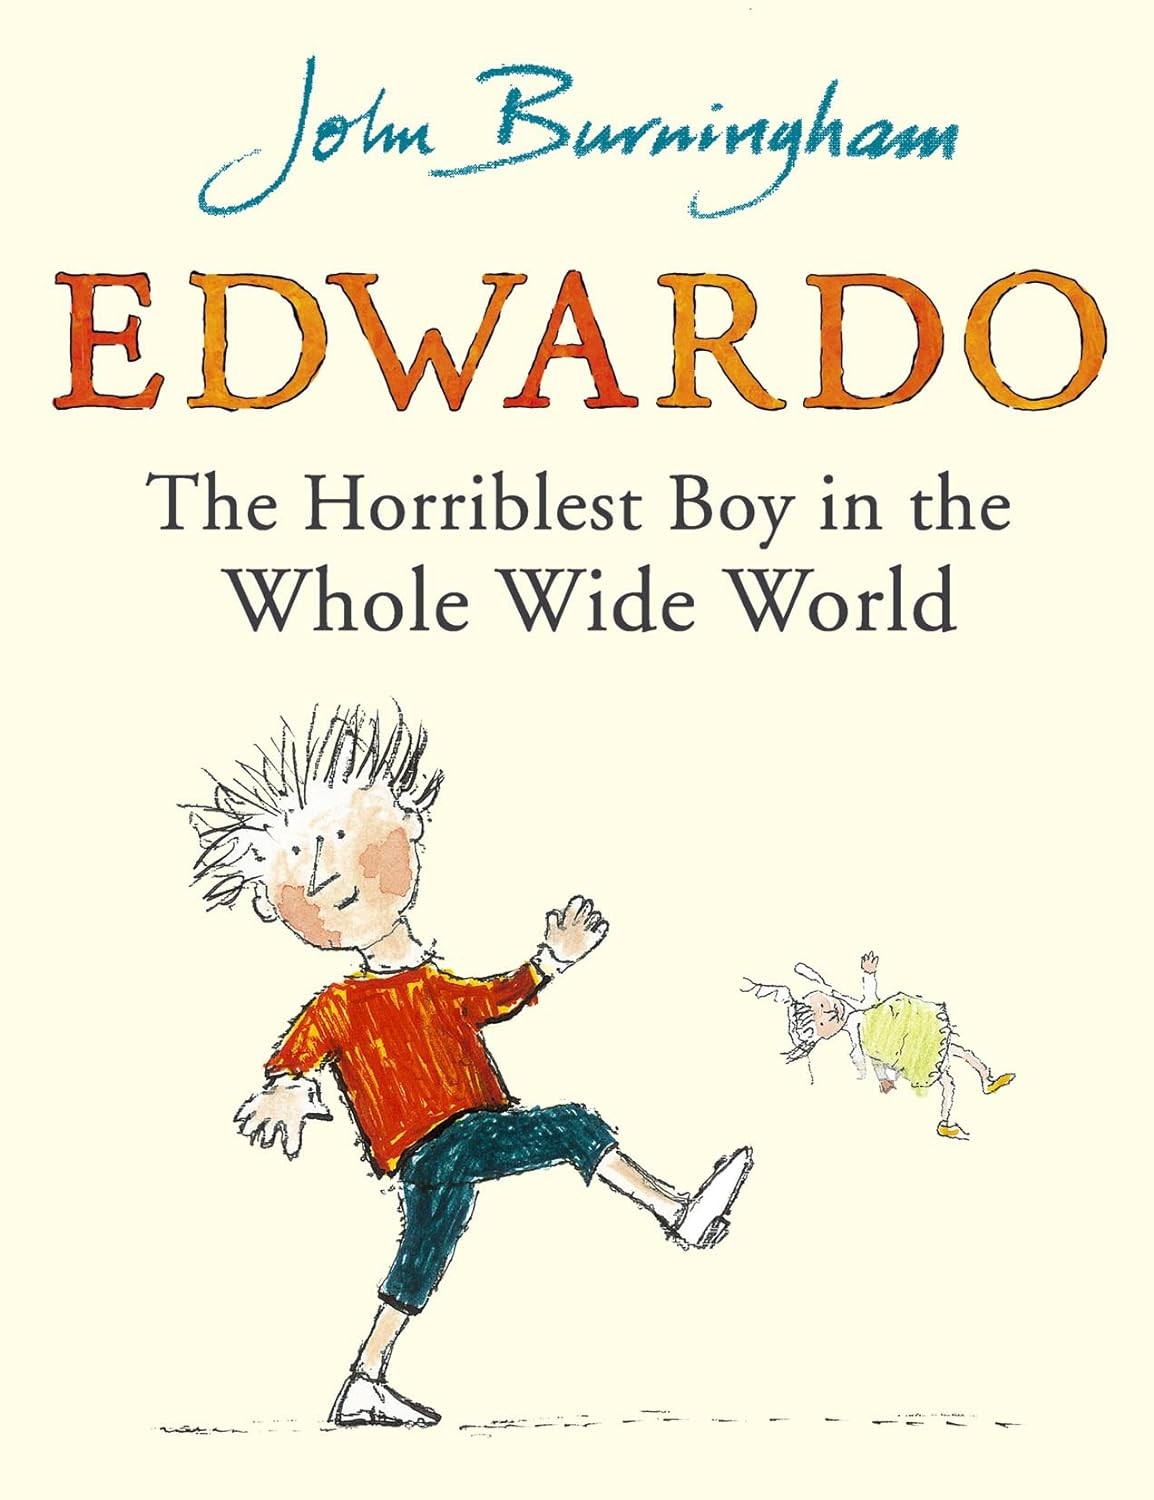 Edwardo the Horriblest Boy in the Whole Wide World